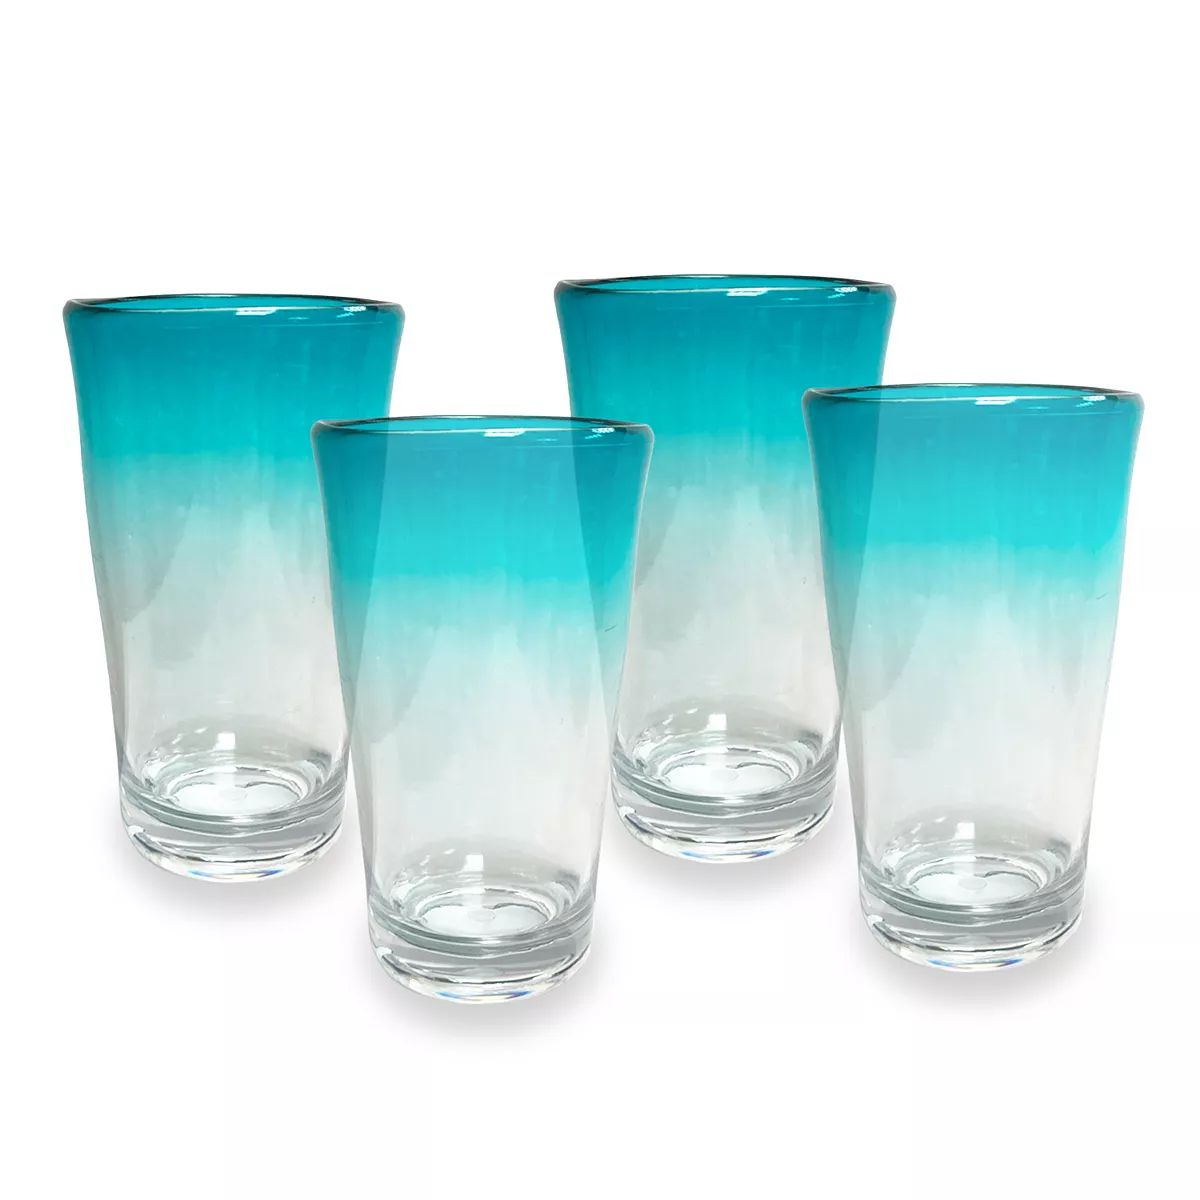 Food Network™ 4-pc. Turquoise Ombre Acrylic Highball Glass Set | Kohl's